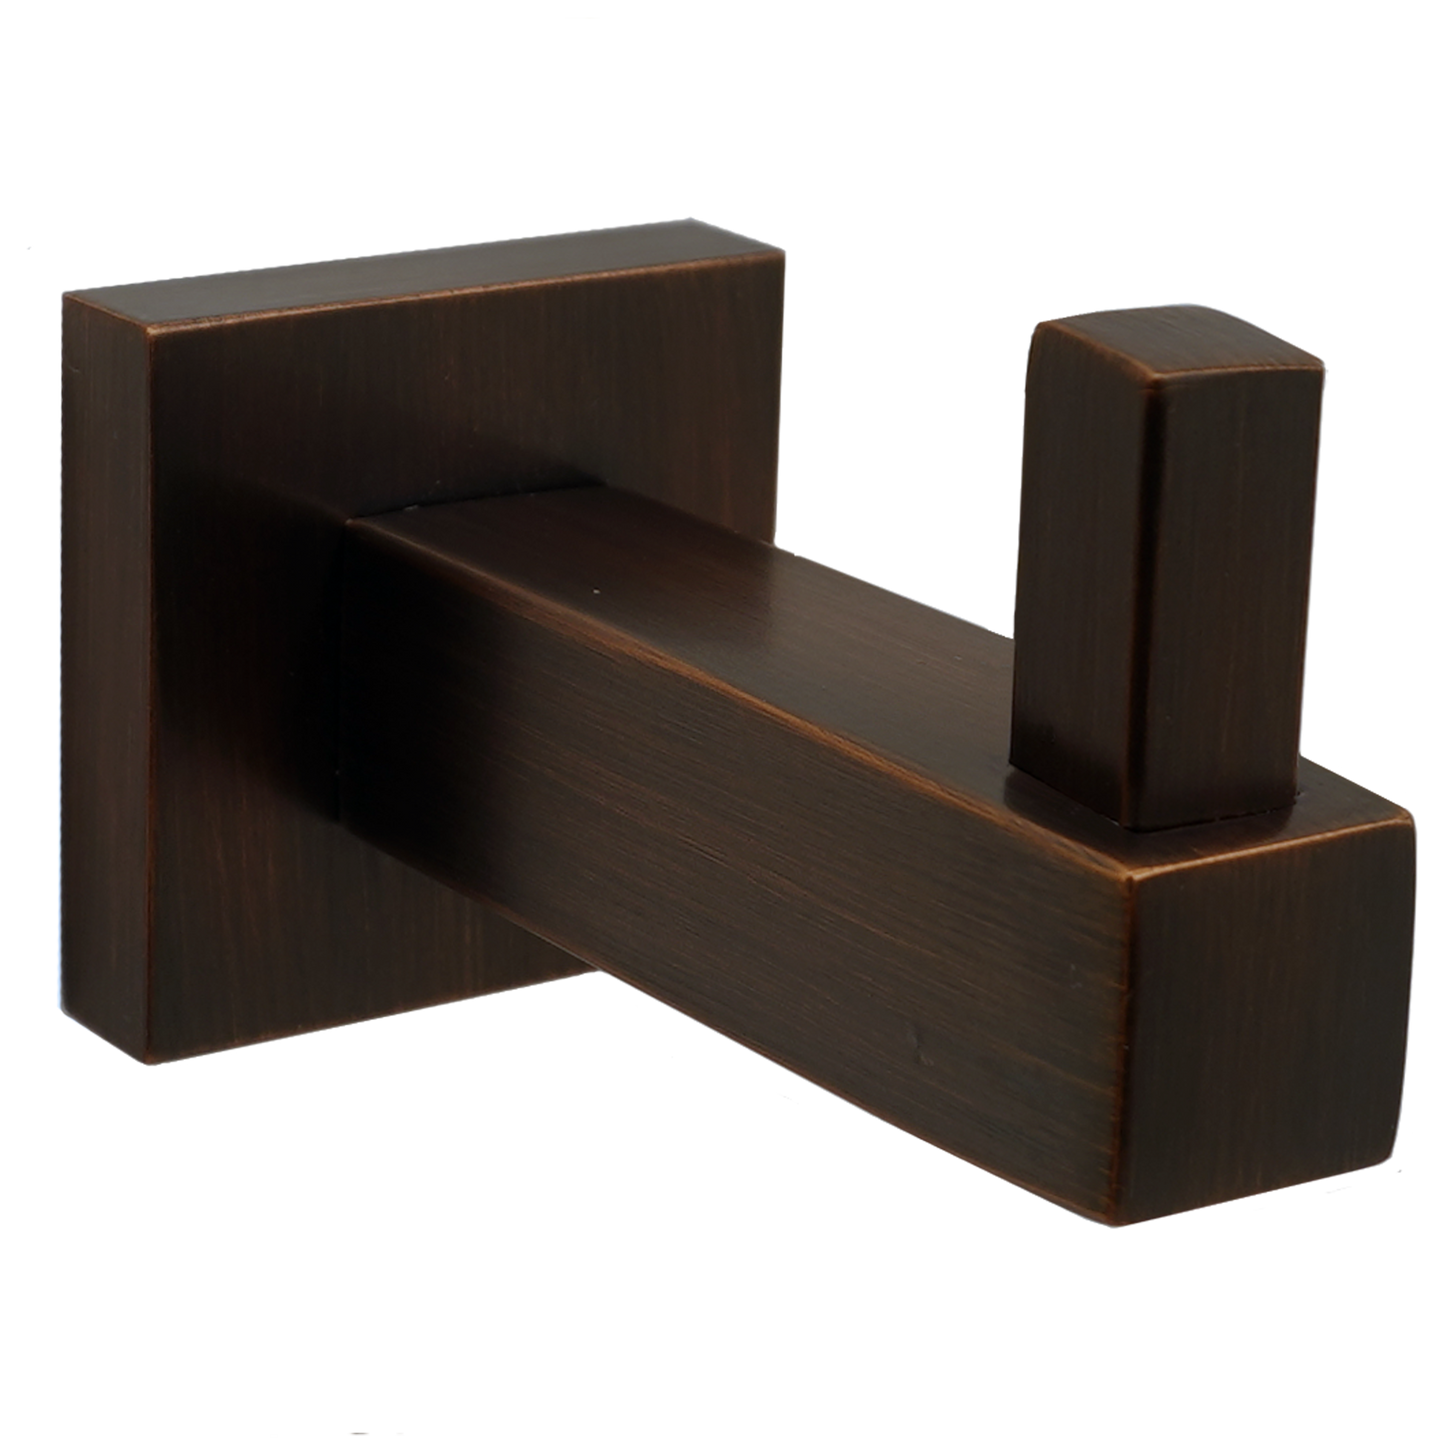 CHS-34 Surface-Mounted Single Coat Hook, Square Style in Venetian Bronze